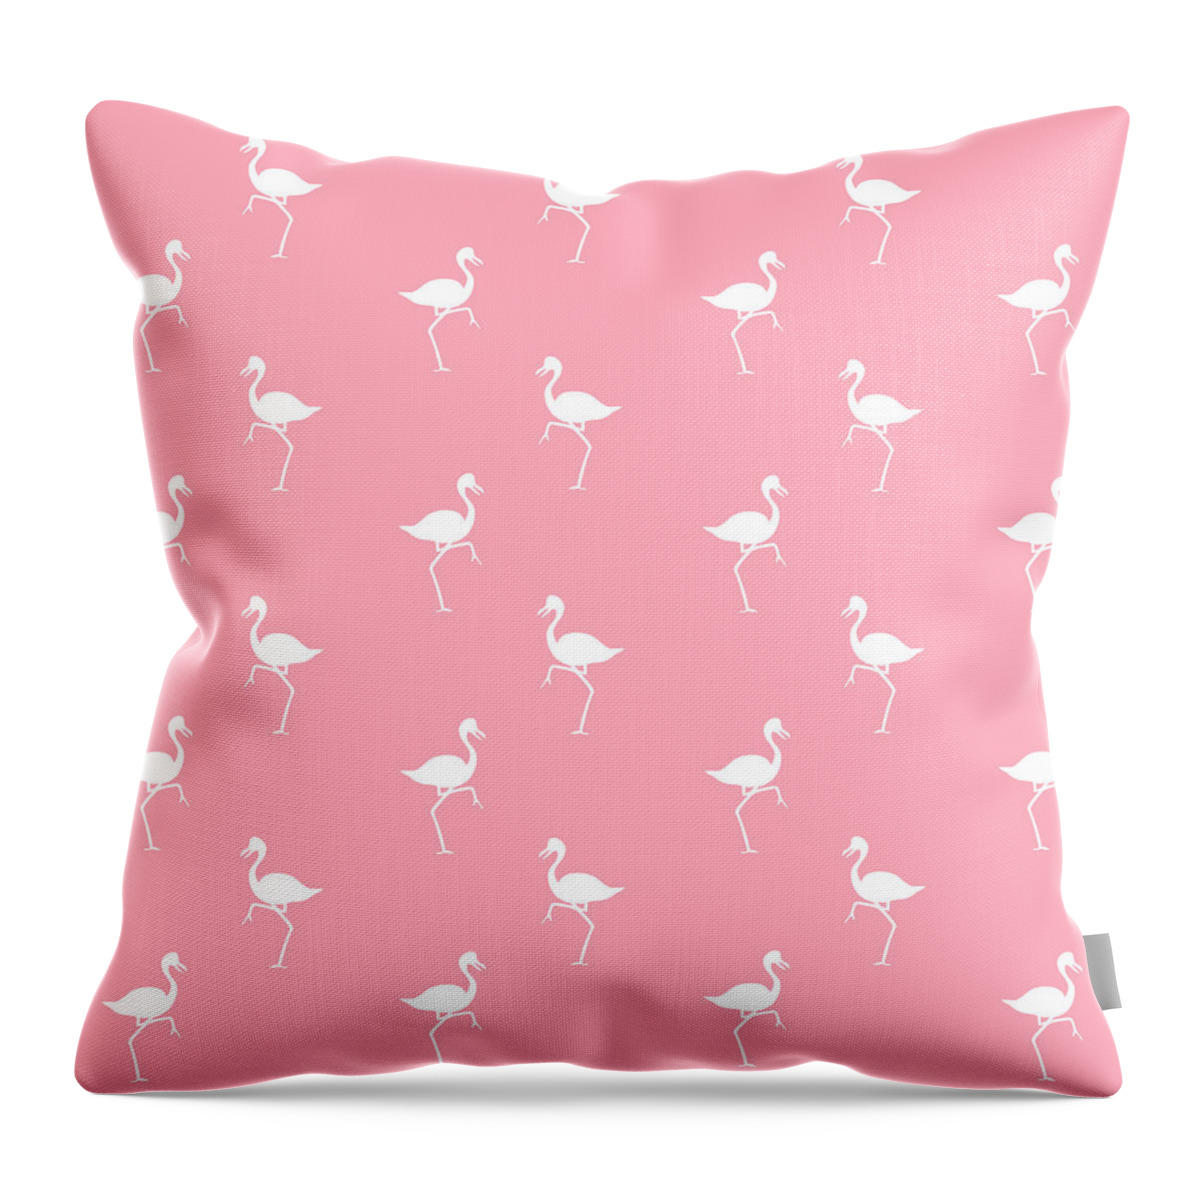 Flamingo Throw Pillow featuring the mixed media Pink Flamingos Pattern by Christina Rollo